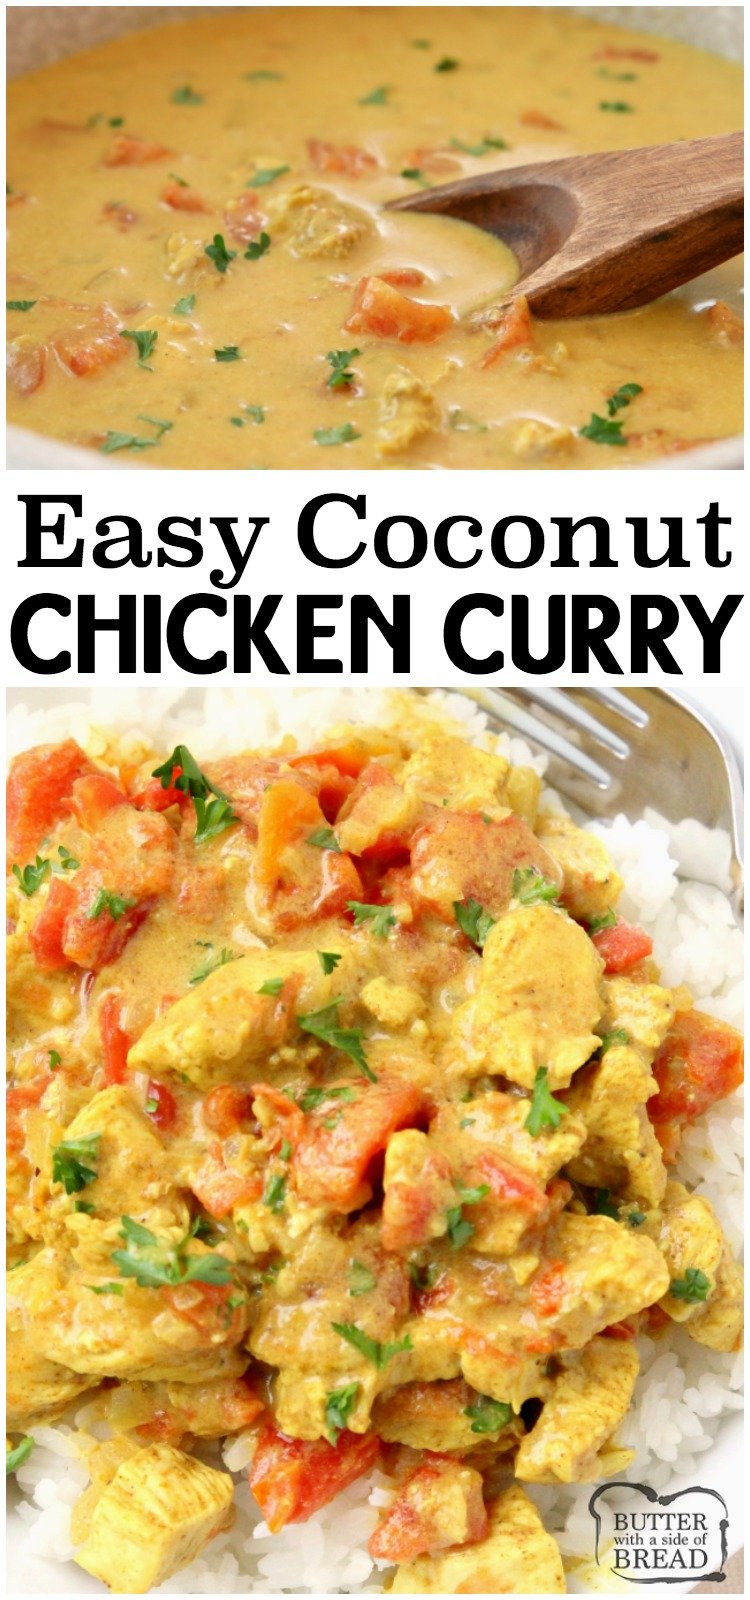 Coconut Chicken Curry recipe perfect for a busy weeknight meal! Simple, flavorful and healthy 20-minute chicken dinner for anyone who loves a mild chicken curry. Our Coconut Curry Chicken recipe uses diced chicken, tomatoes, coconut milk and just enough curry to add flavor, but not make it too spicy. #chicken #dinner #curry #coconut #chickencurry #food #recipe from BUTTER WITH A SIDE OF BREAD